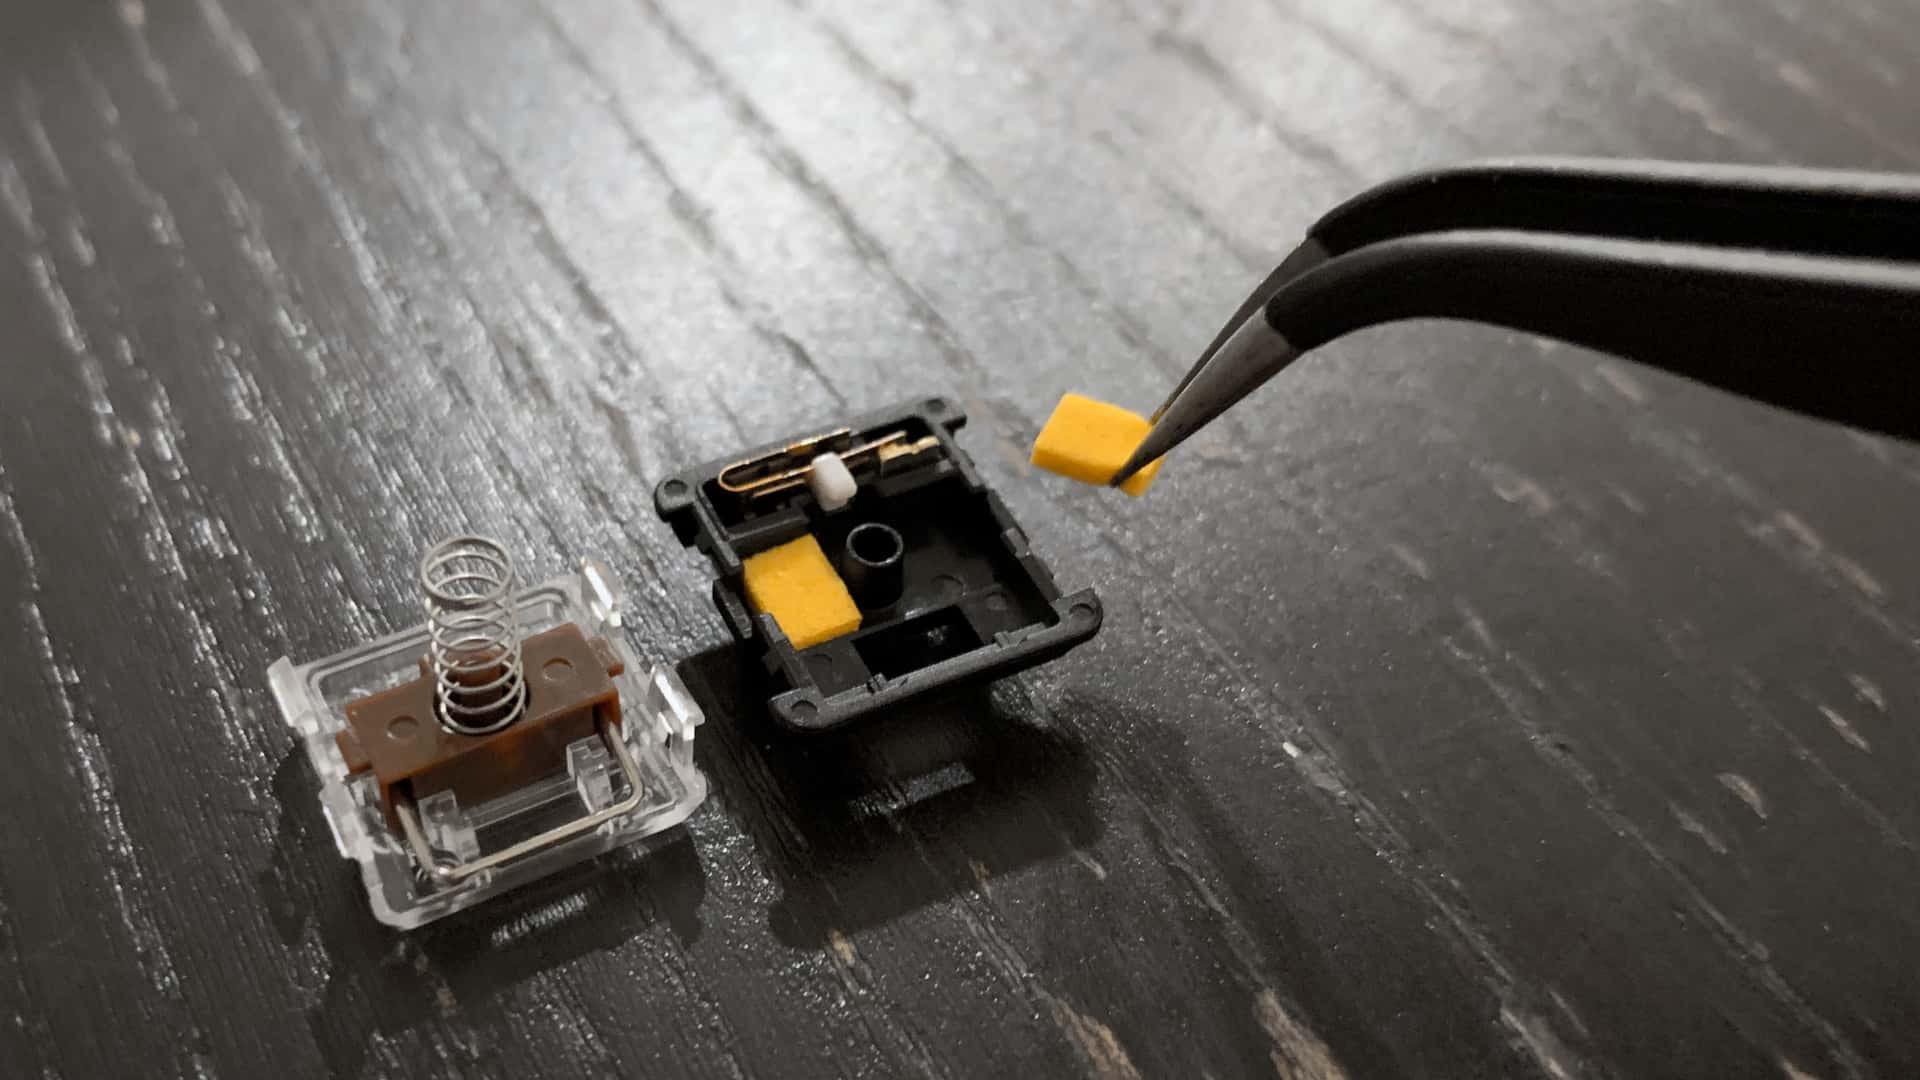 tweezers inserting a yellow foam pad into an opened Kailh “Choc” Brown key switch